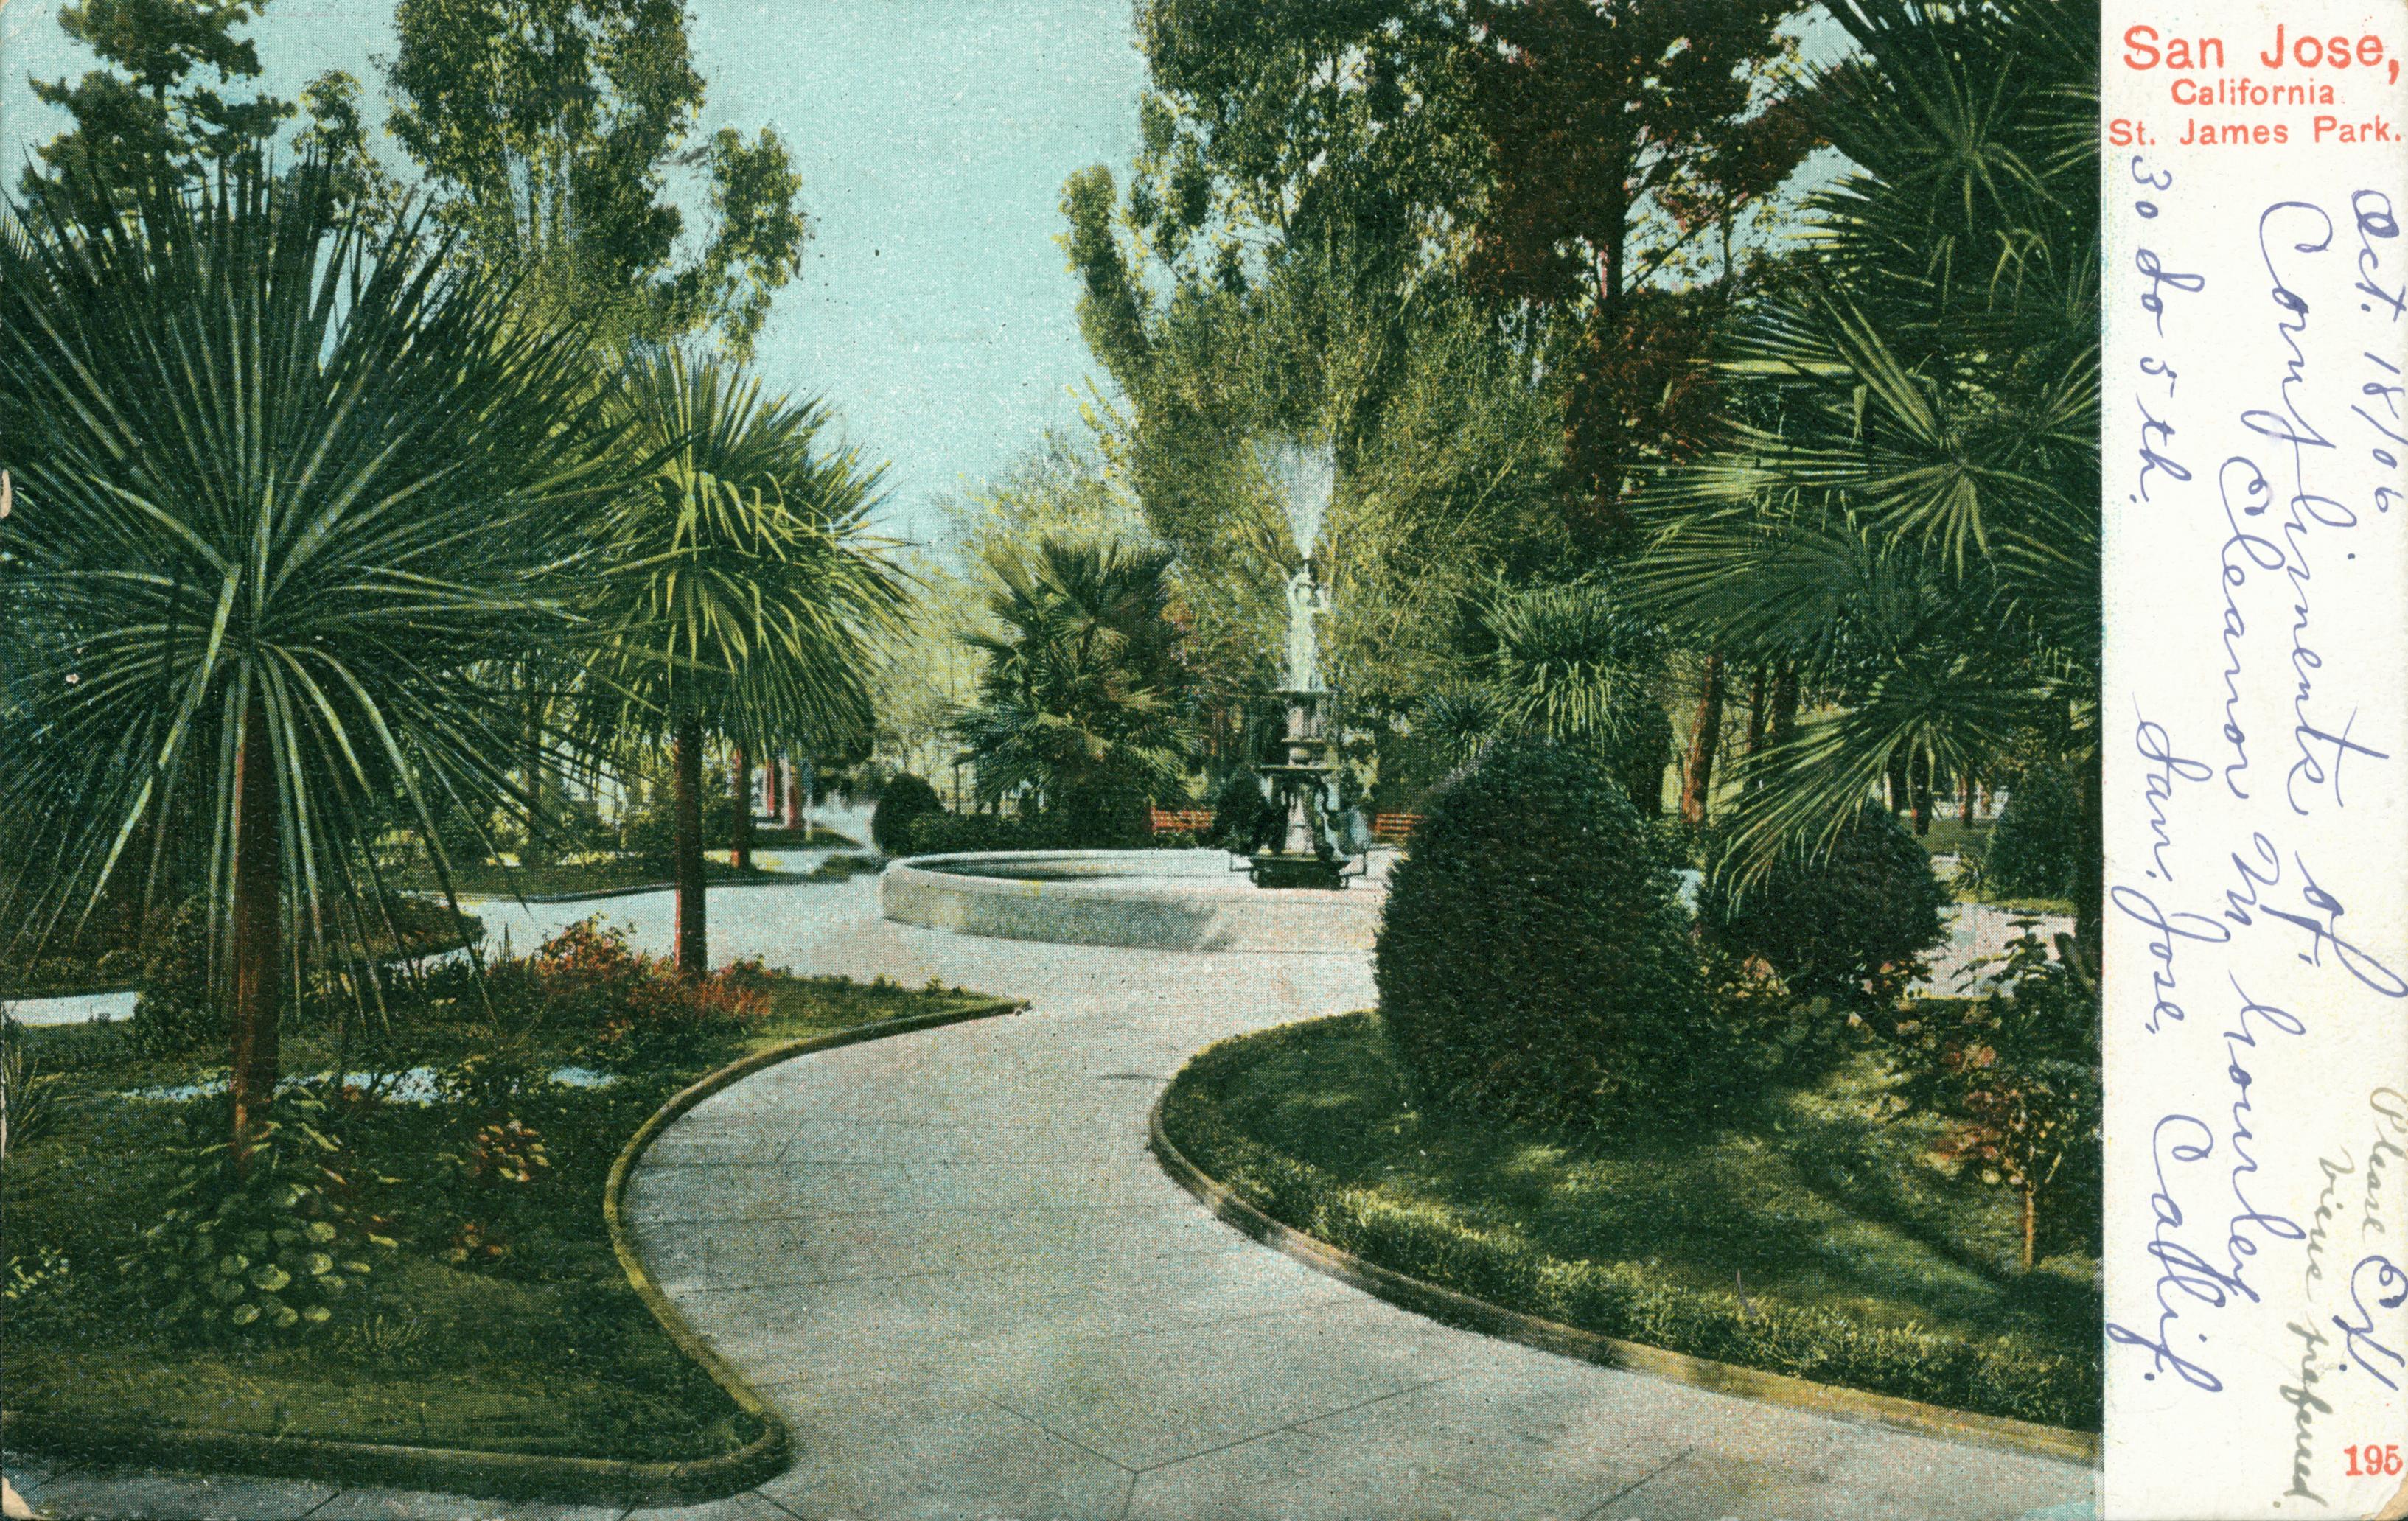 Color scene of fountain, paths, garden beds